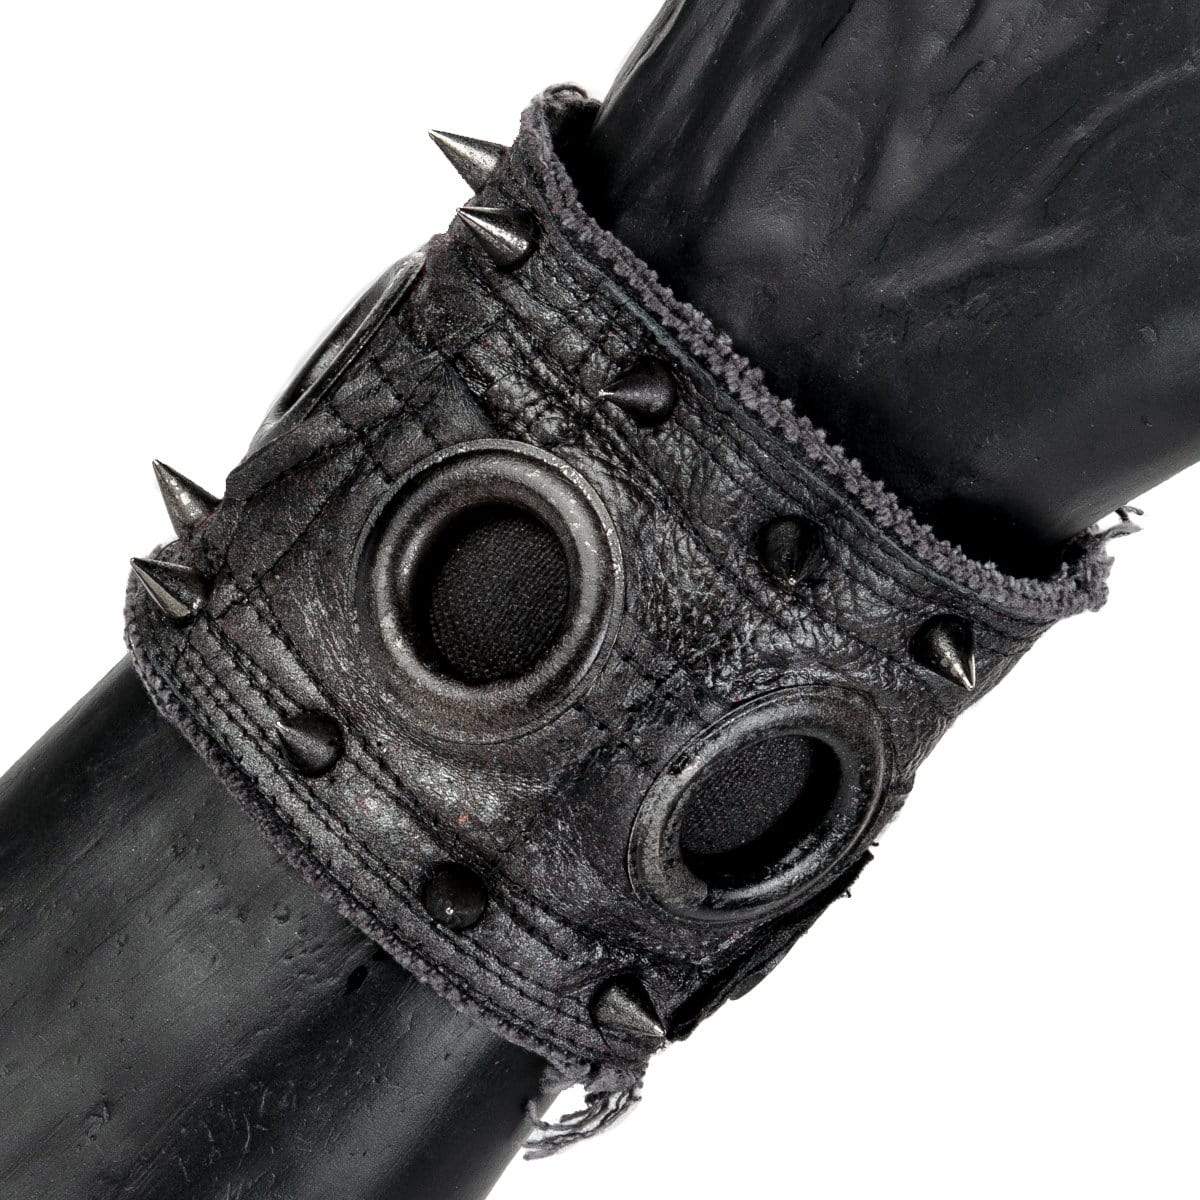 • Wornstar Custom Stage Wear Collection• Custom leather wrist band• Completely hand-made at time of order • Designed, made, and sold exclusively by Wornstar Clothing• Individually made; each one will vary slightly• Made with soft leather• Lined with fabric for comfort• Hand-studded detail with small cone spikes•